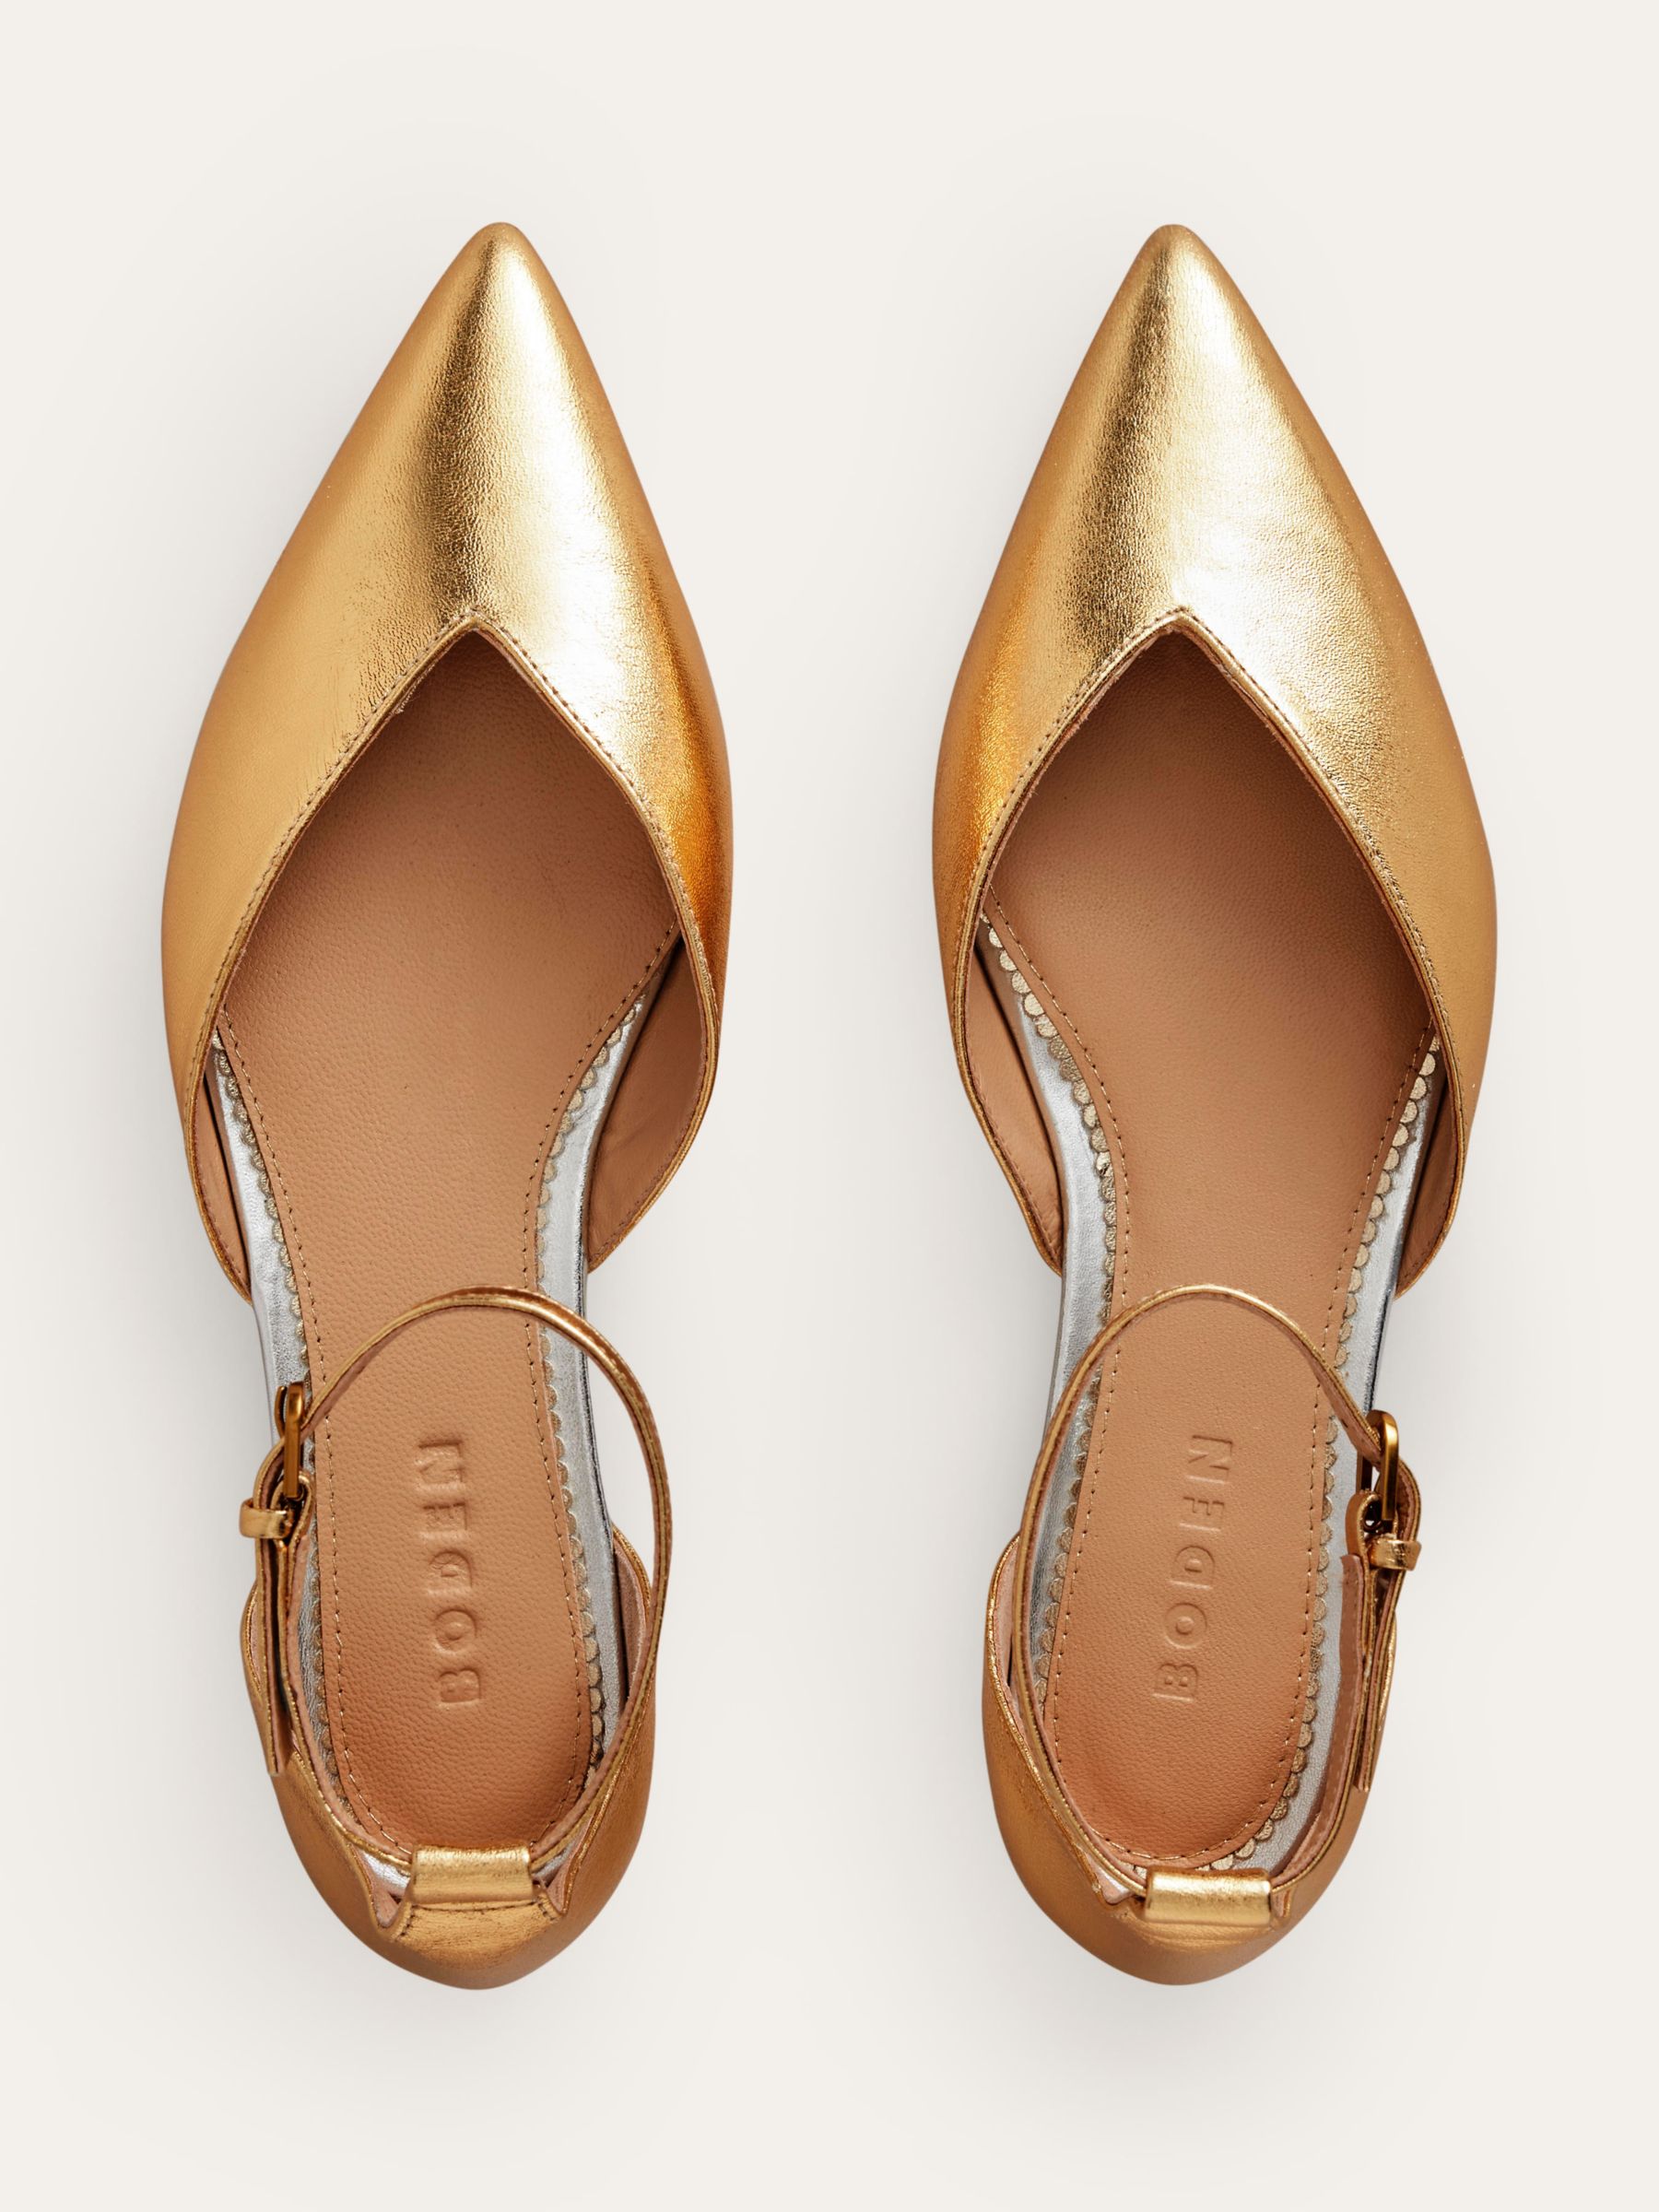 Boden Metallic Leather Ankle Strap Pointed Flats, Gold, 4